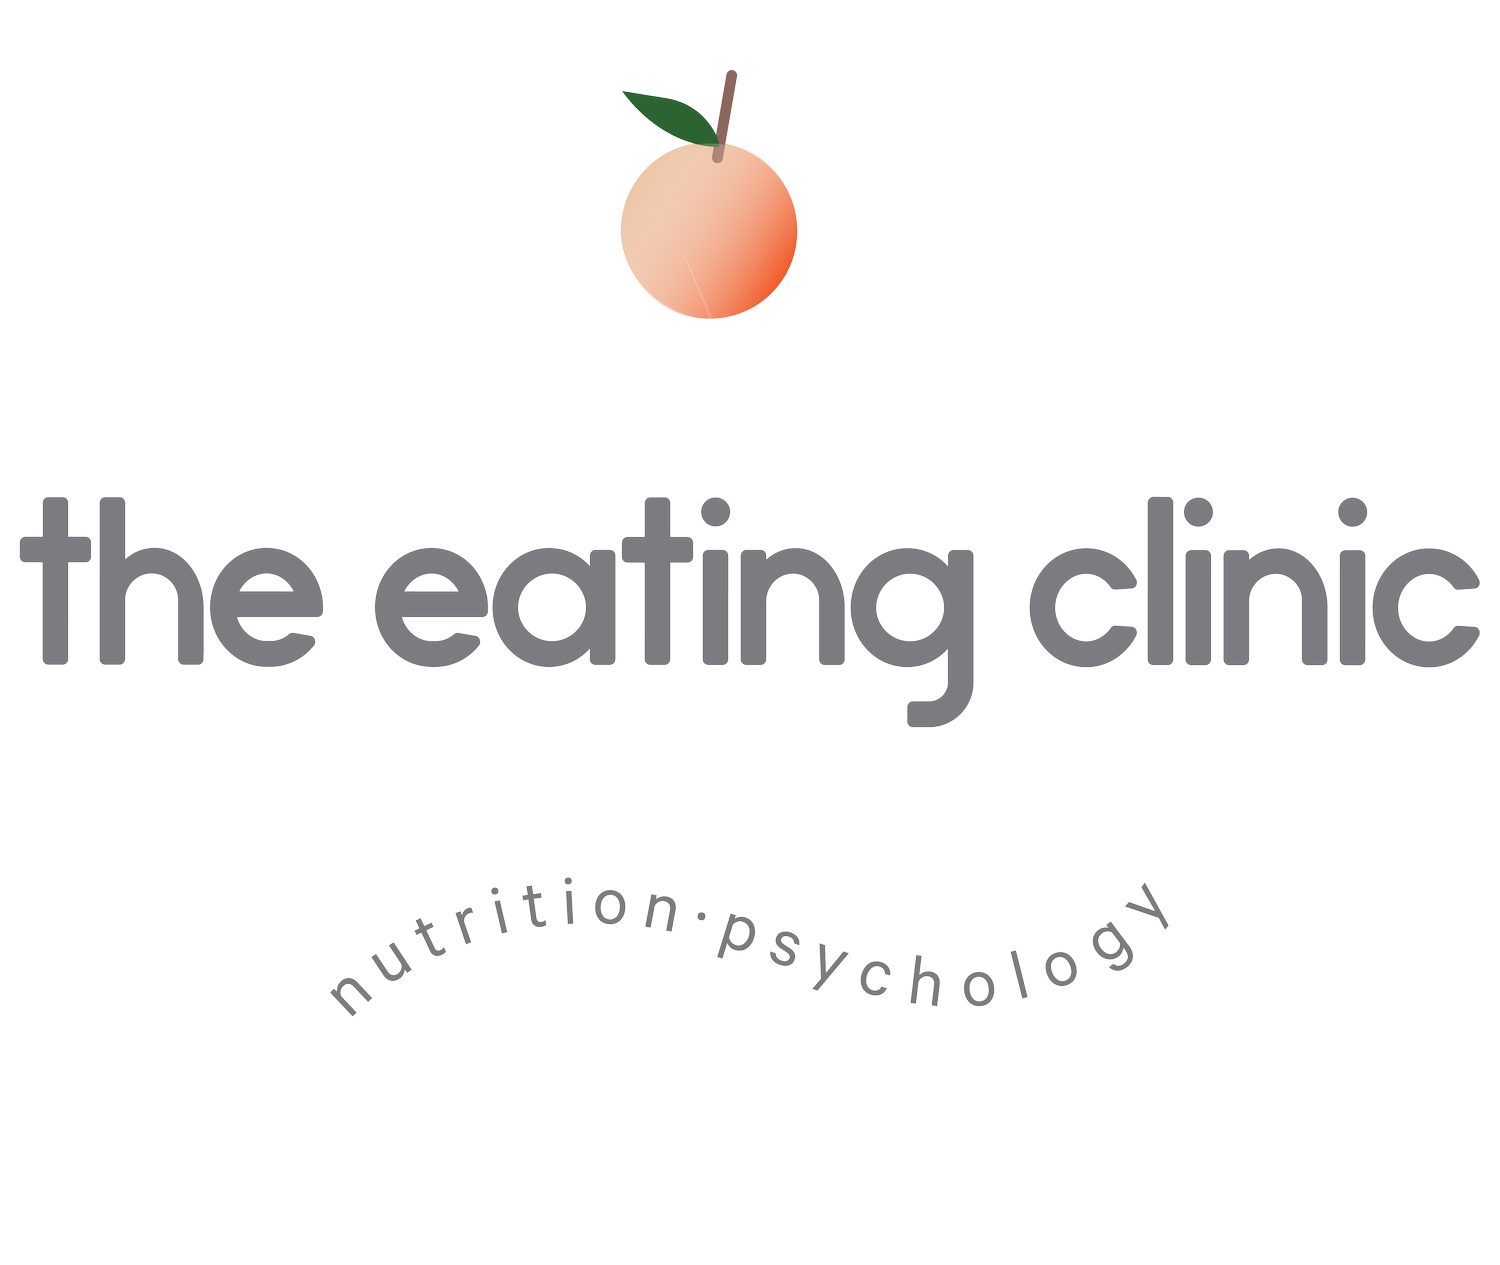 The Eating Clinic